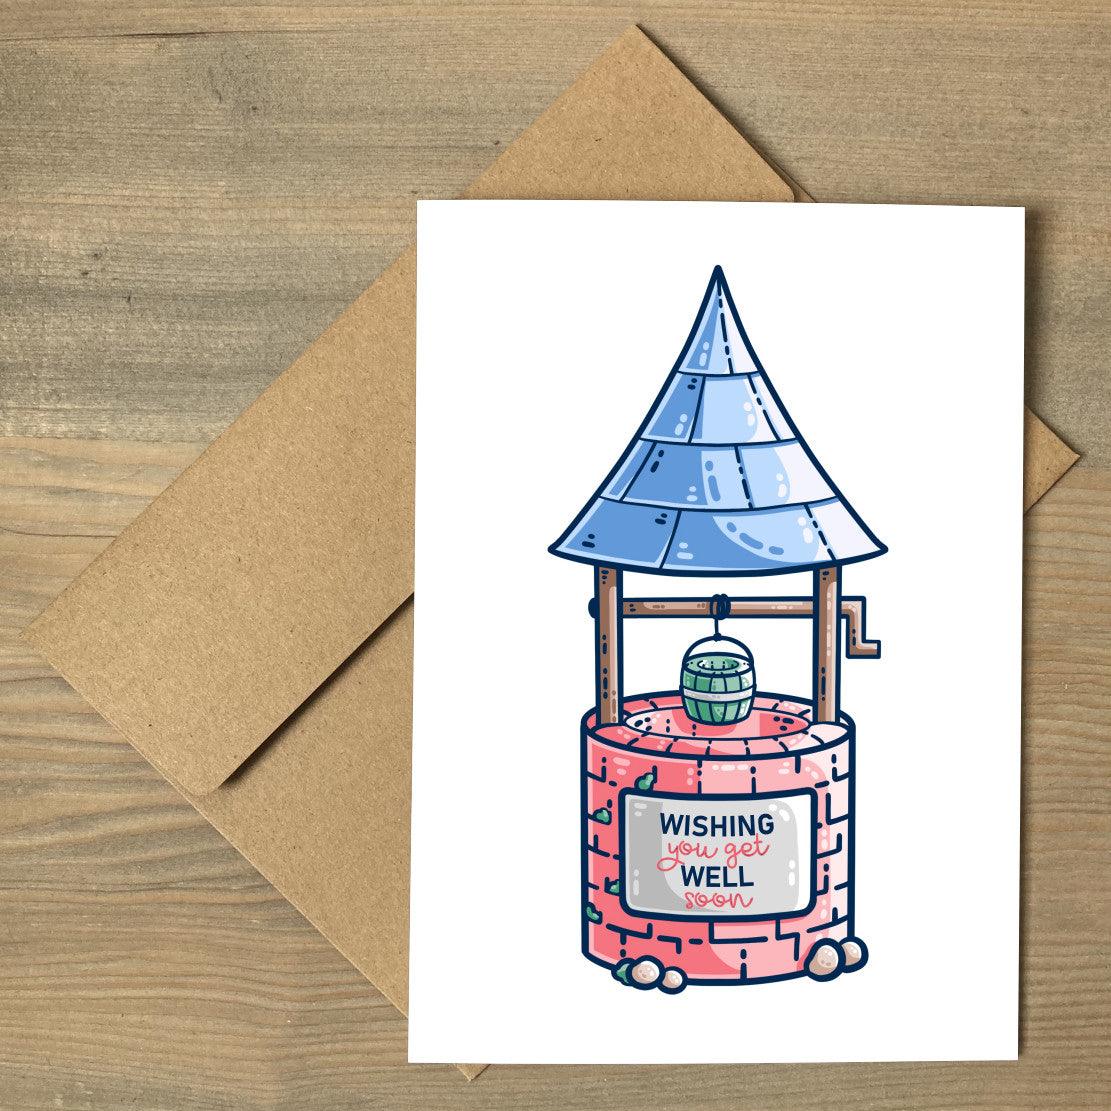 A white greeting card lying flat on a brown envelope, with a design of a wishing well with blue pointy roof, green bucket, red stone and a sign with the words wishing you get well soon